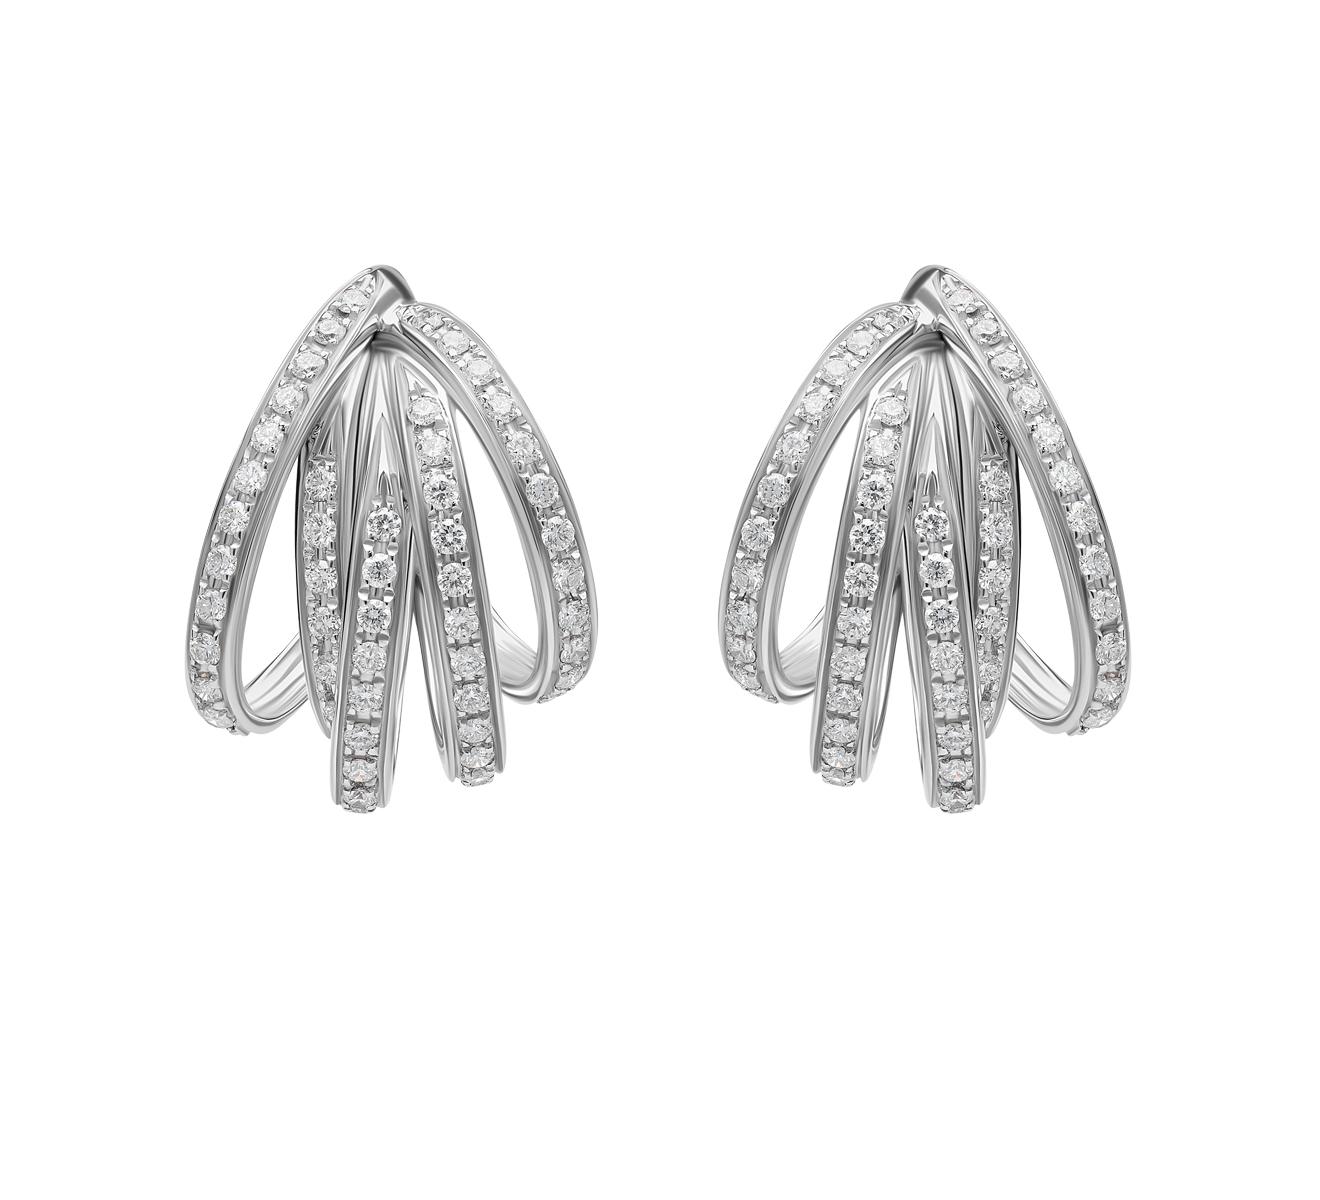 Contemporary Mattioli Tibet Earrings in Rose Gold and White Diamonds For Sale